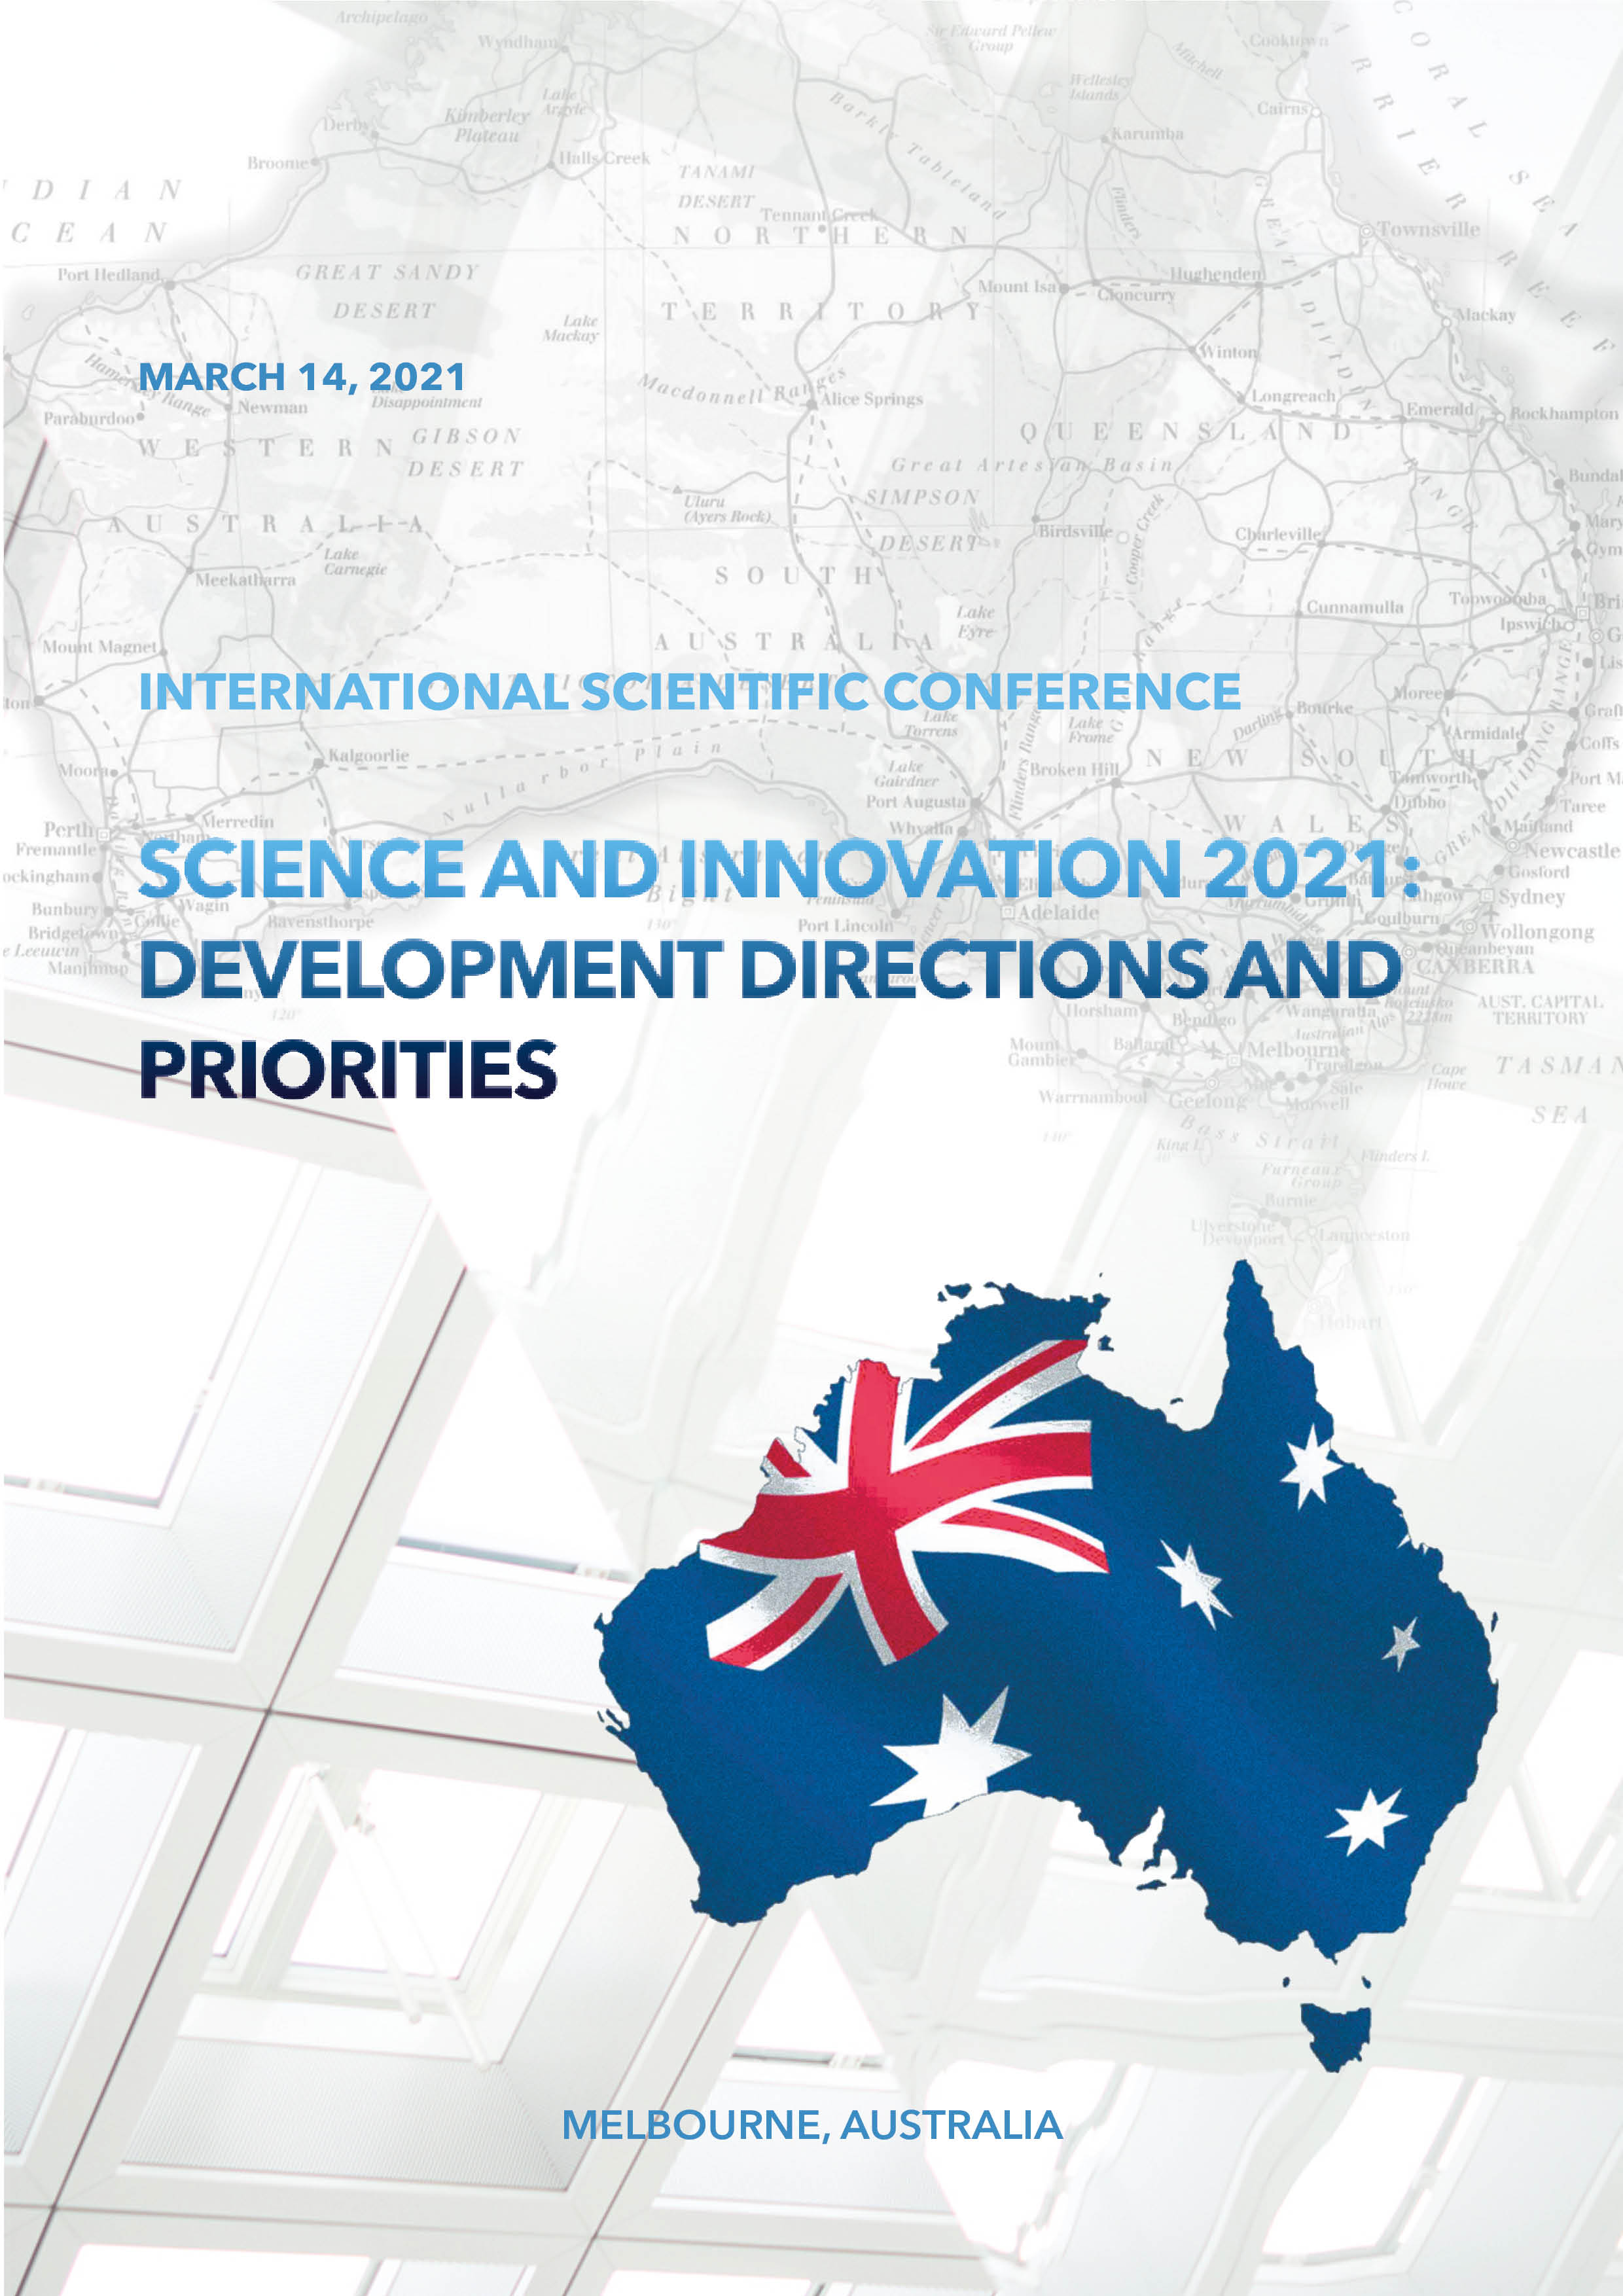             SCIENCE AND INNOVATION 2021: DEVELOPMENT DIRECTIONS AND PRIORITIES. Vol.I
    